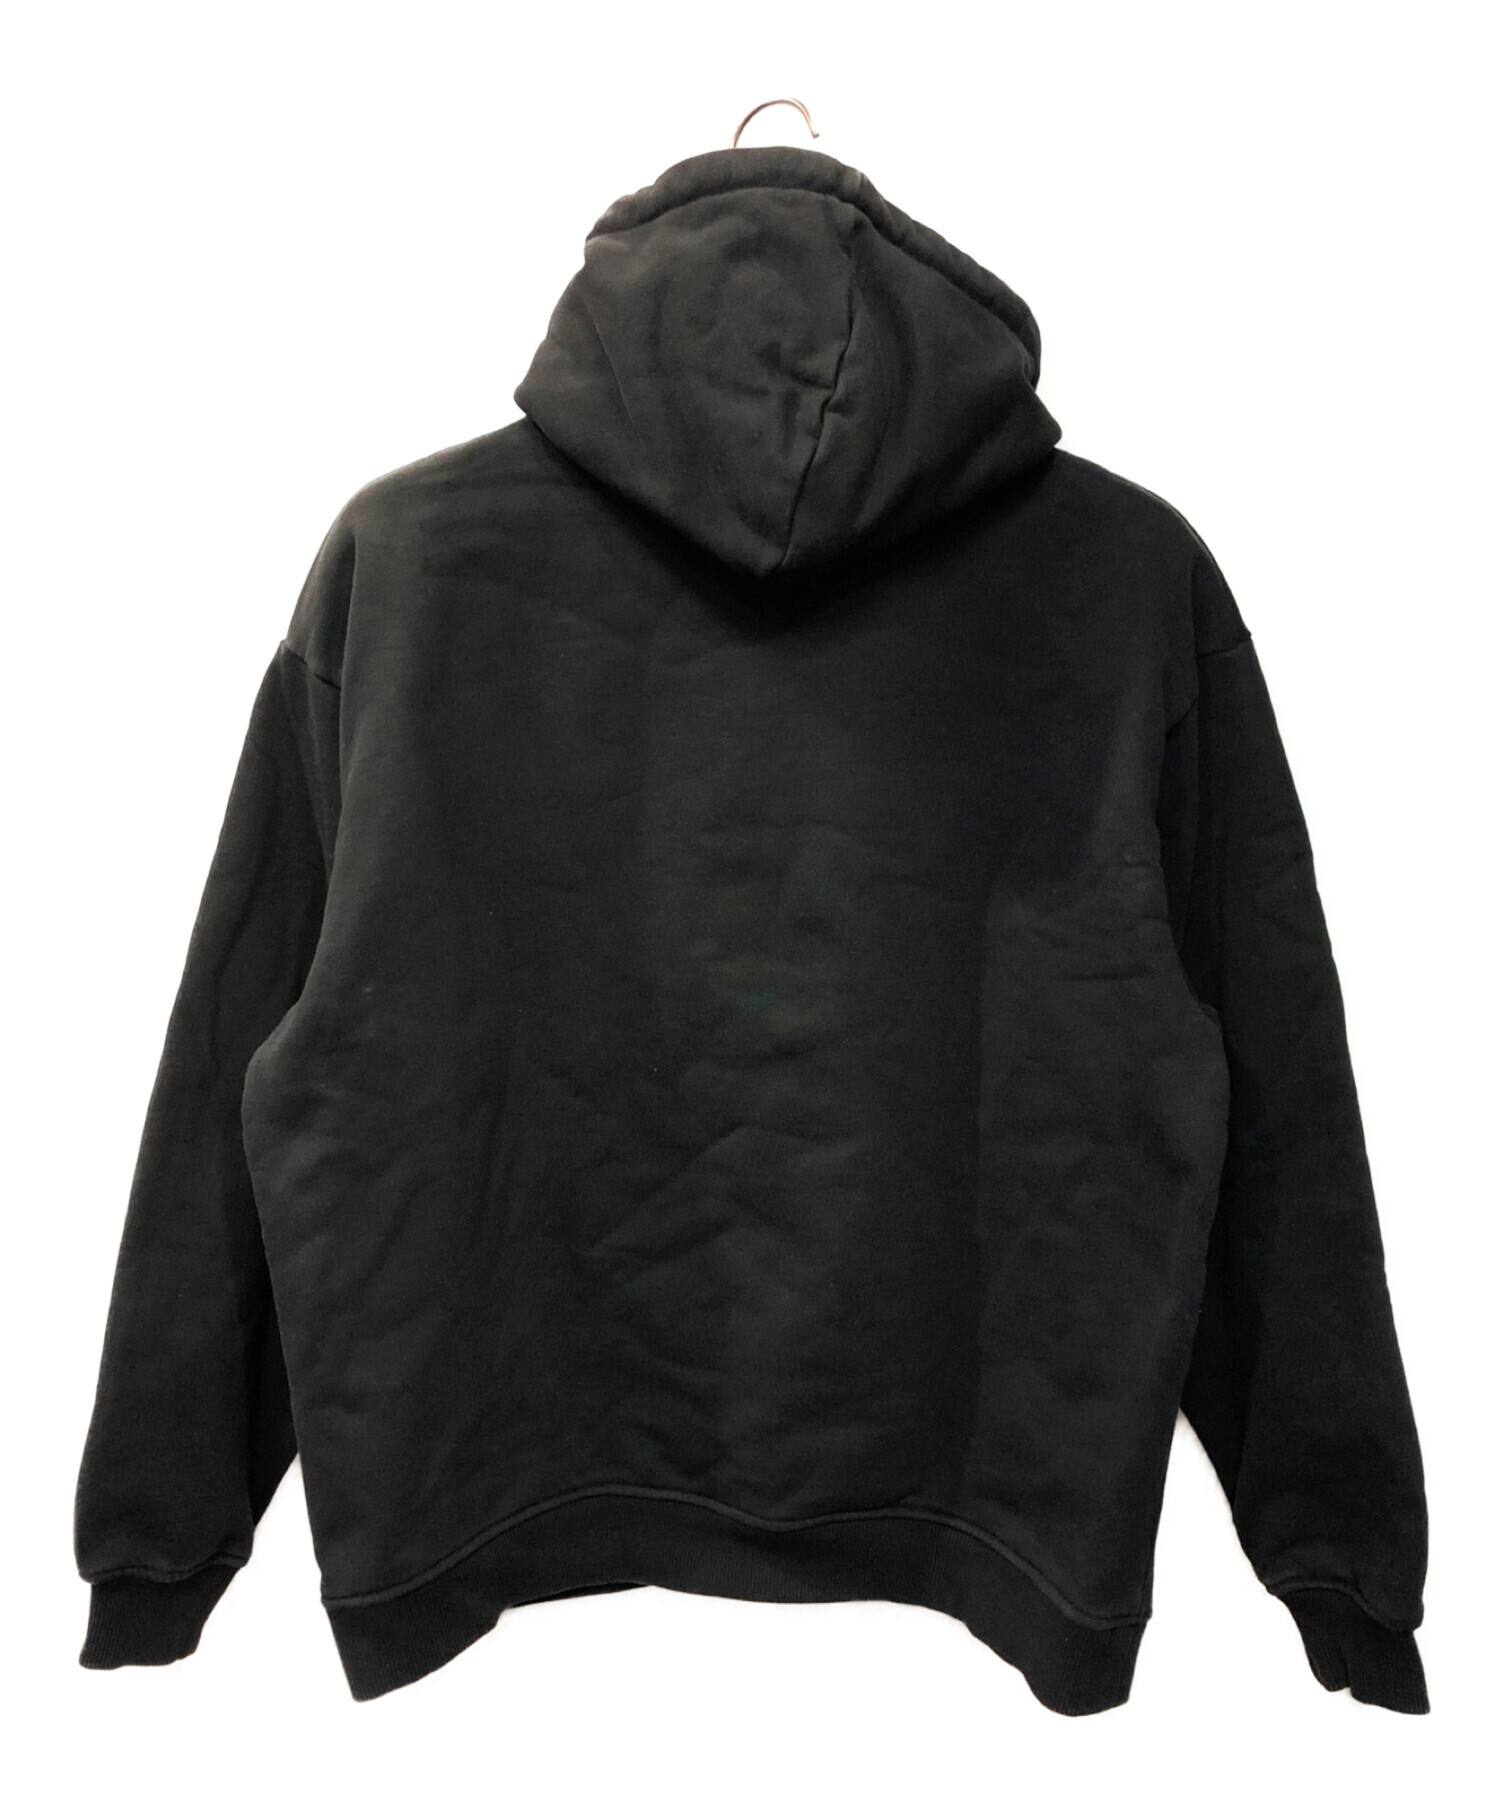 KITH キス The Notorious B.I.G. Hoodie パーカー